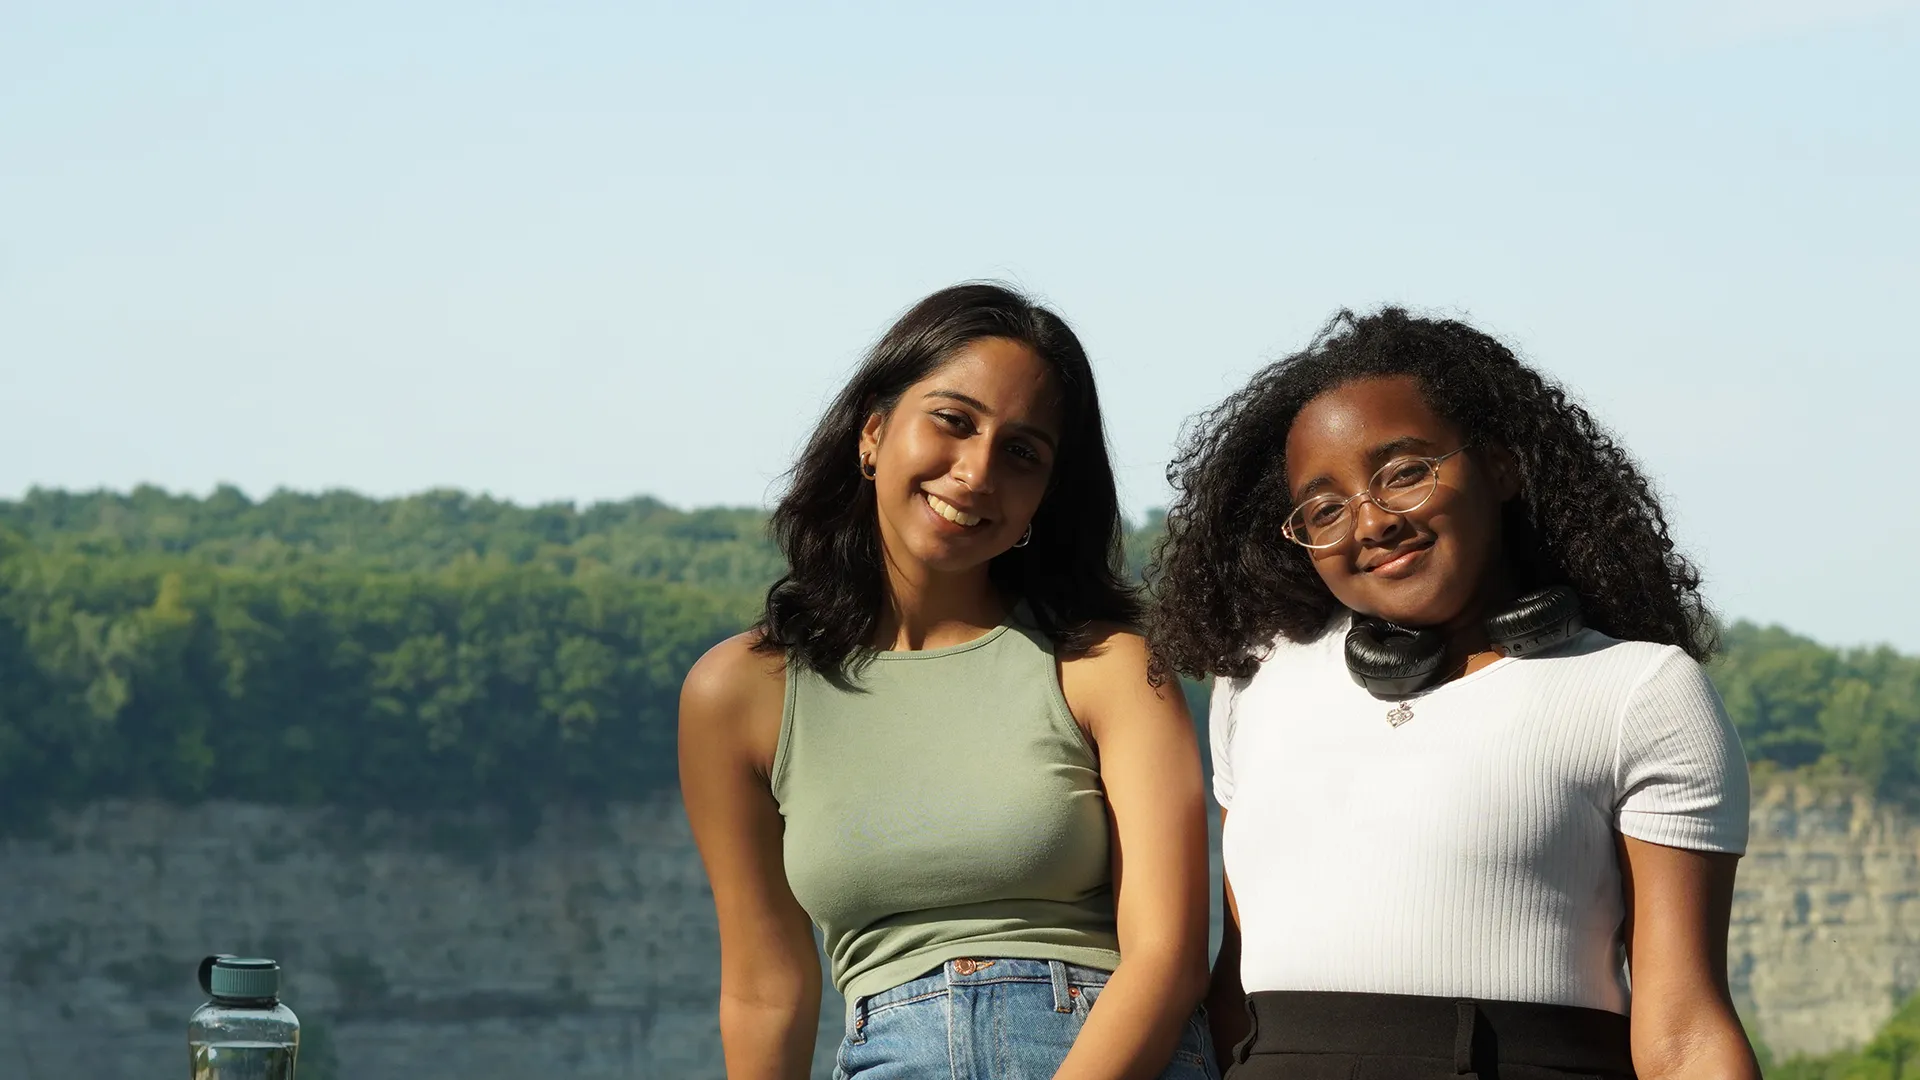 Two Houghton international interconnect students leaning against rock ledge in front of scenic vista.